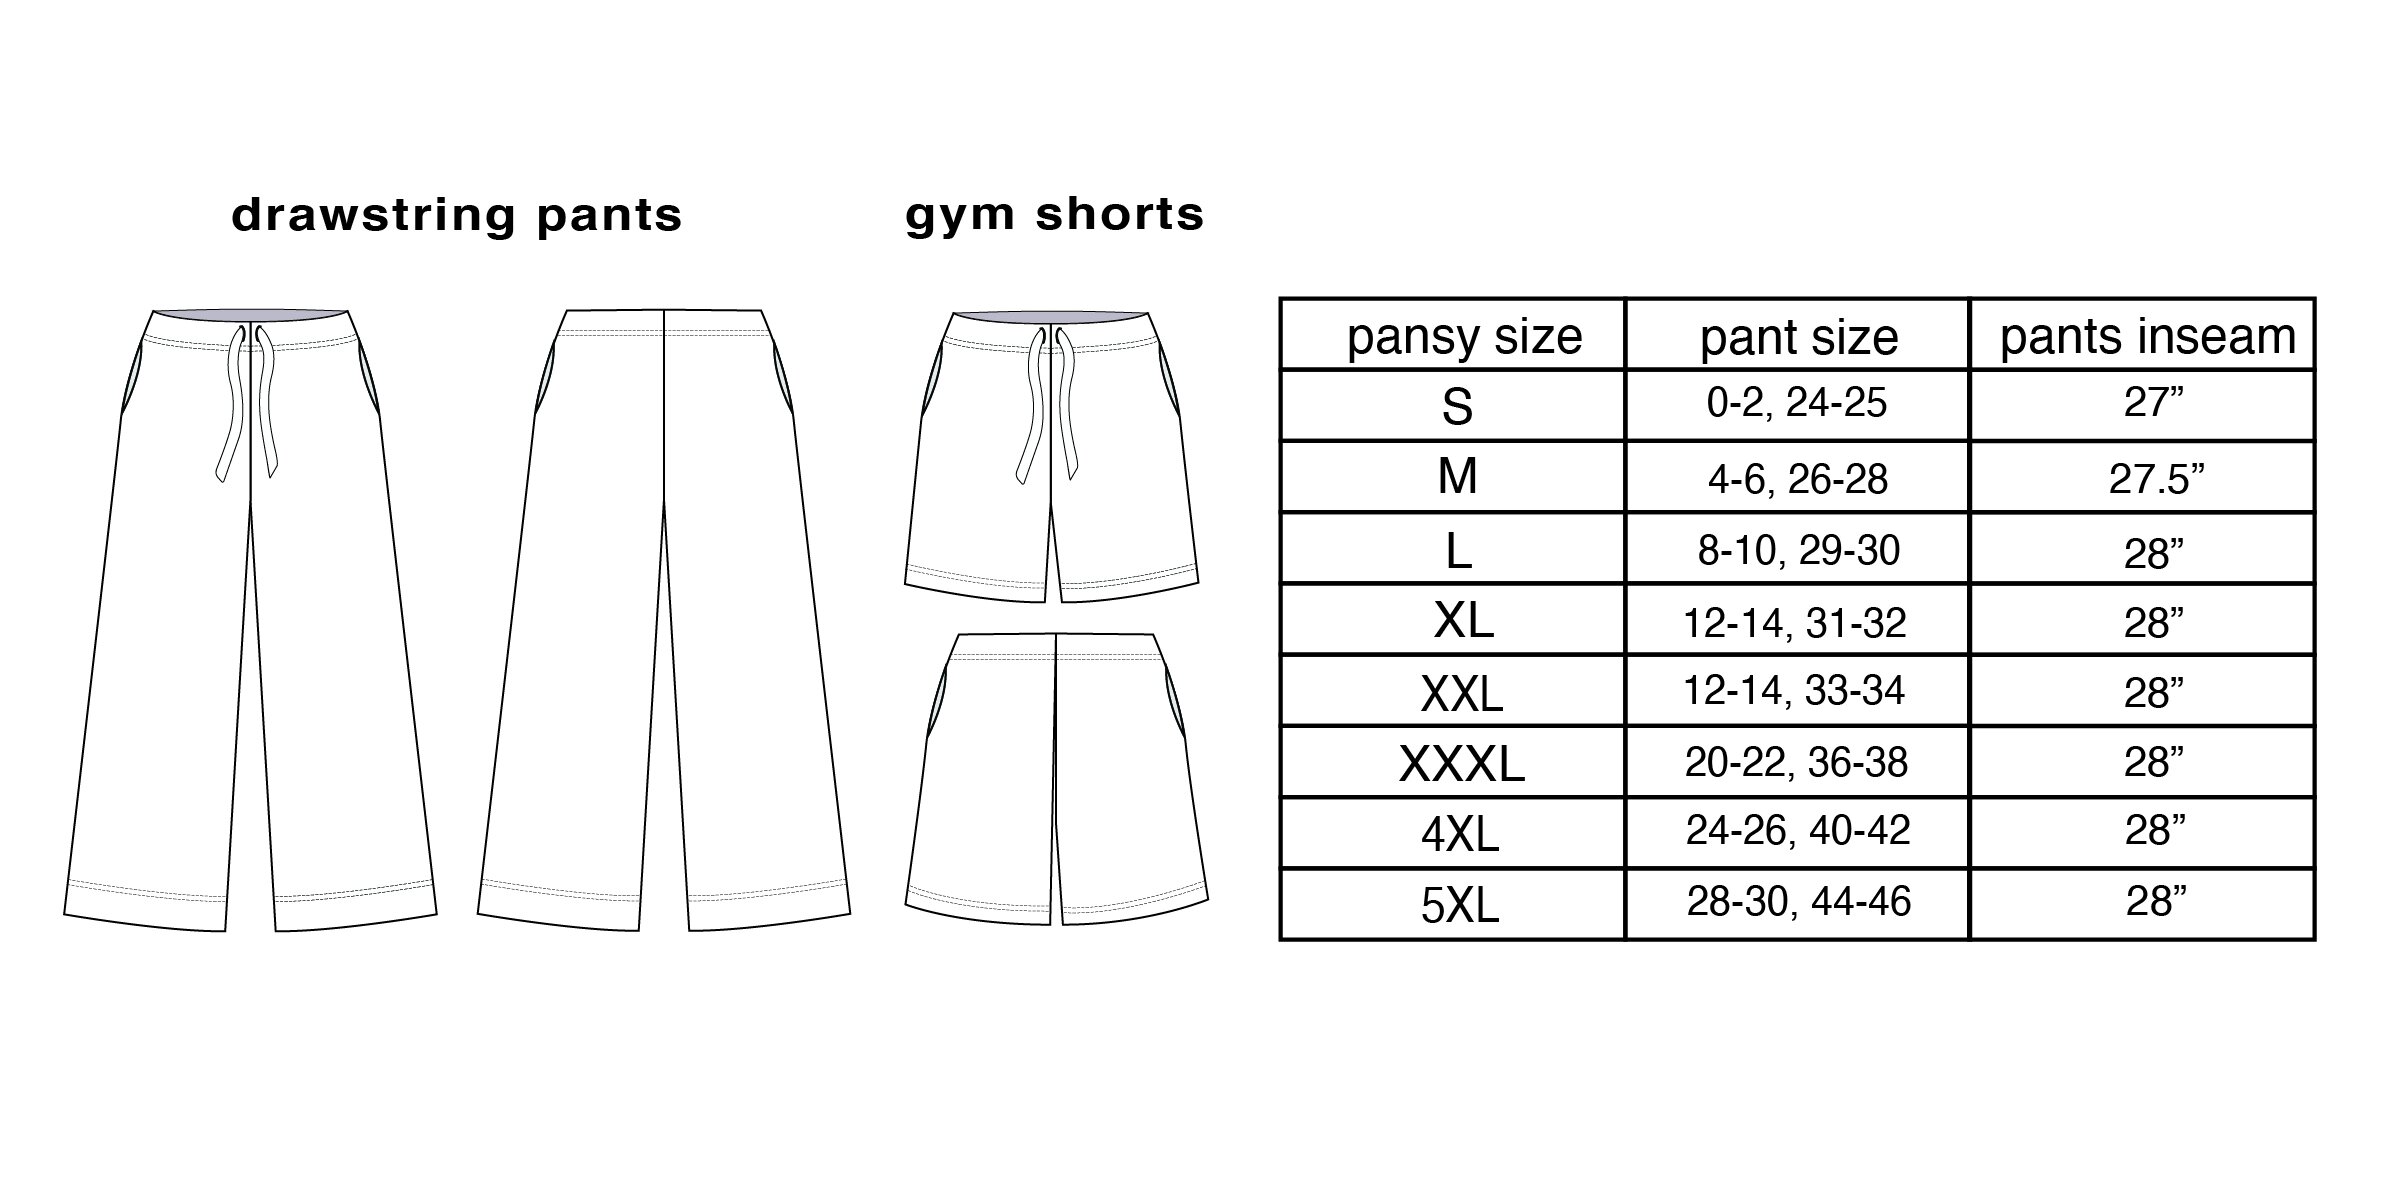 Golf ParteeSize Chart for Golf Partee Apparel shirts trousers belts   Creating fun stylish and functional golf apparel with the best fabrics  Premium golf brand for those who truly love golf Your